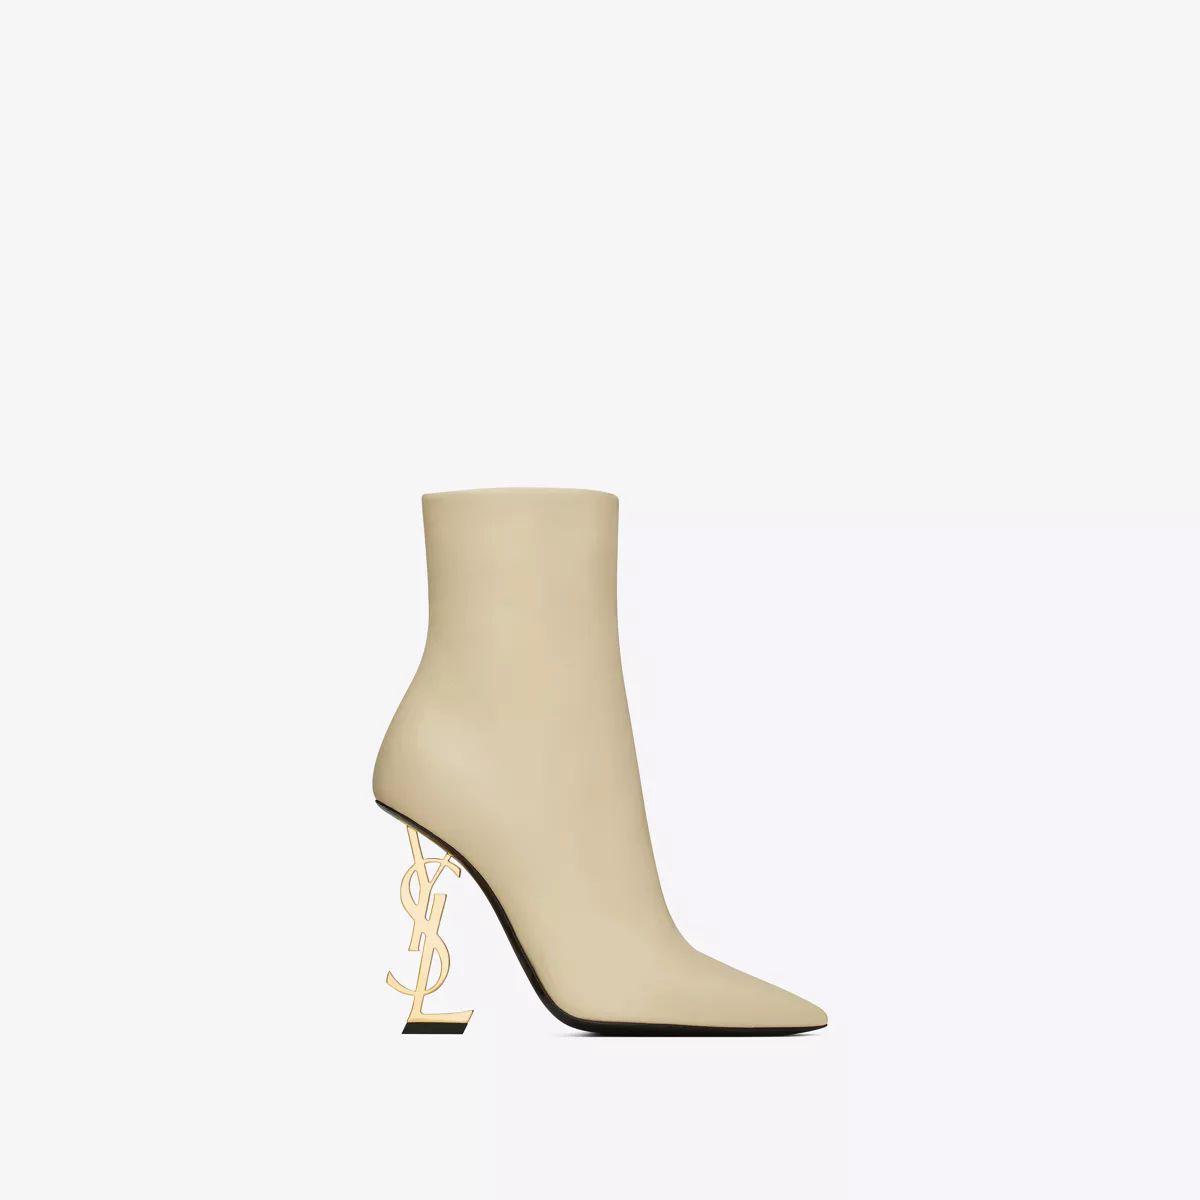 Opyum Ankle Booties In Smooth Leather With A Gold-Tone Heel Beige 5.5 | Saint Laurent Inc. (Global)